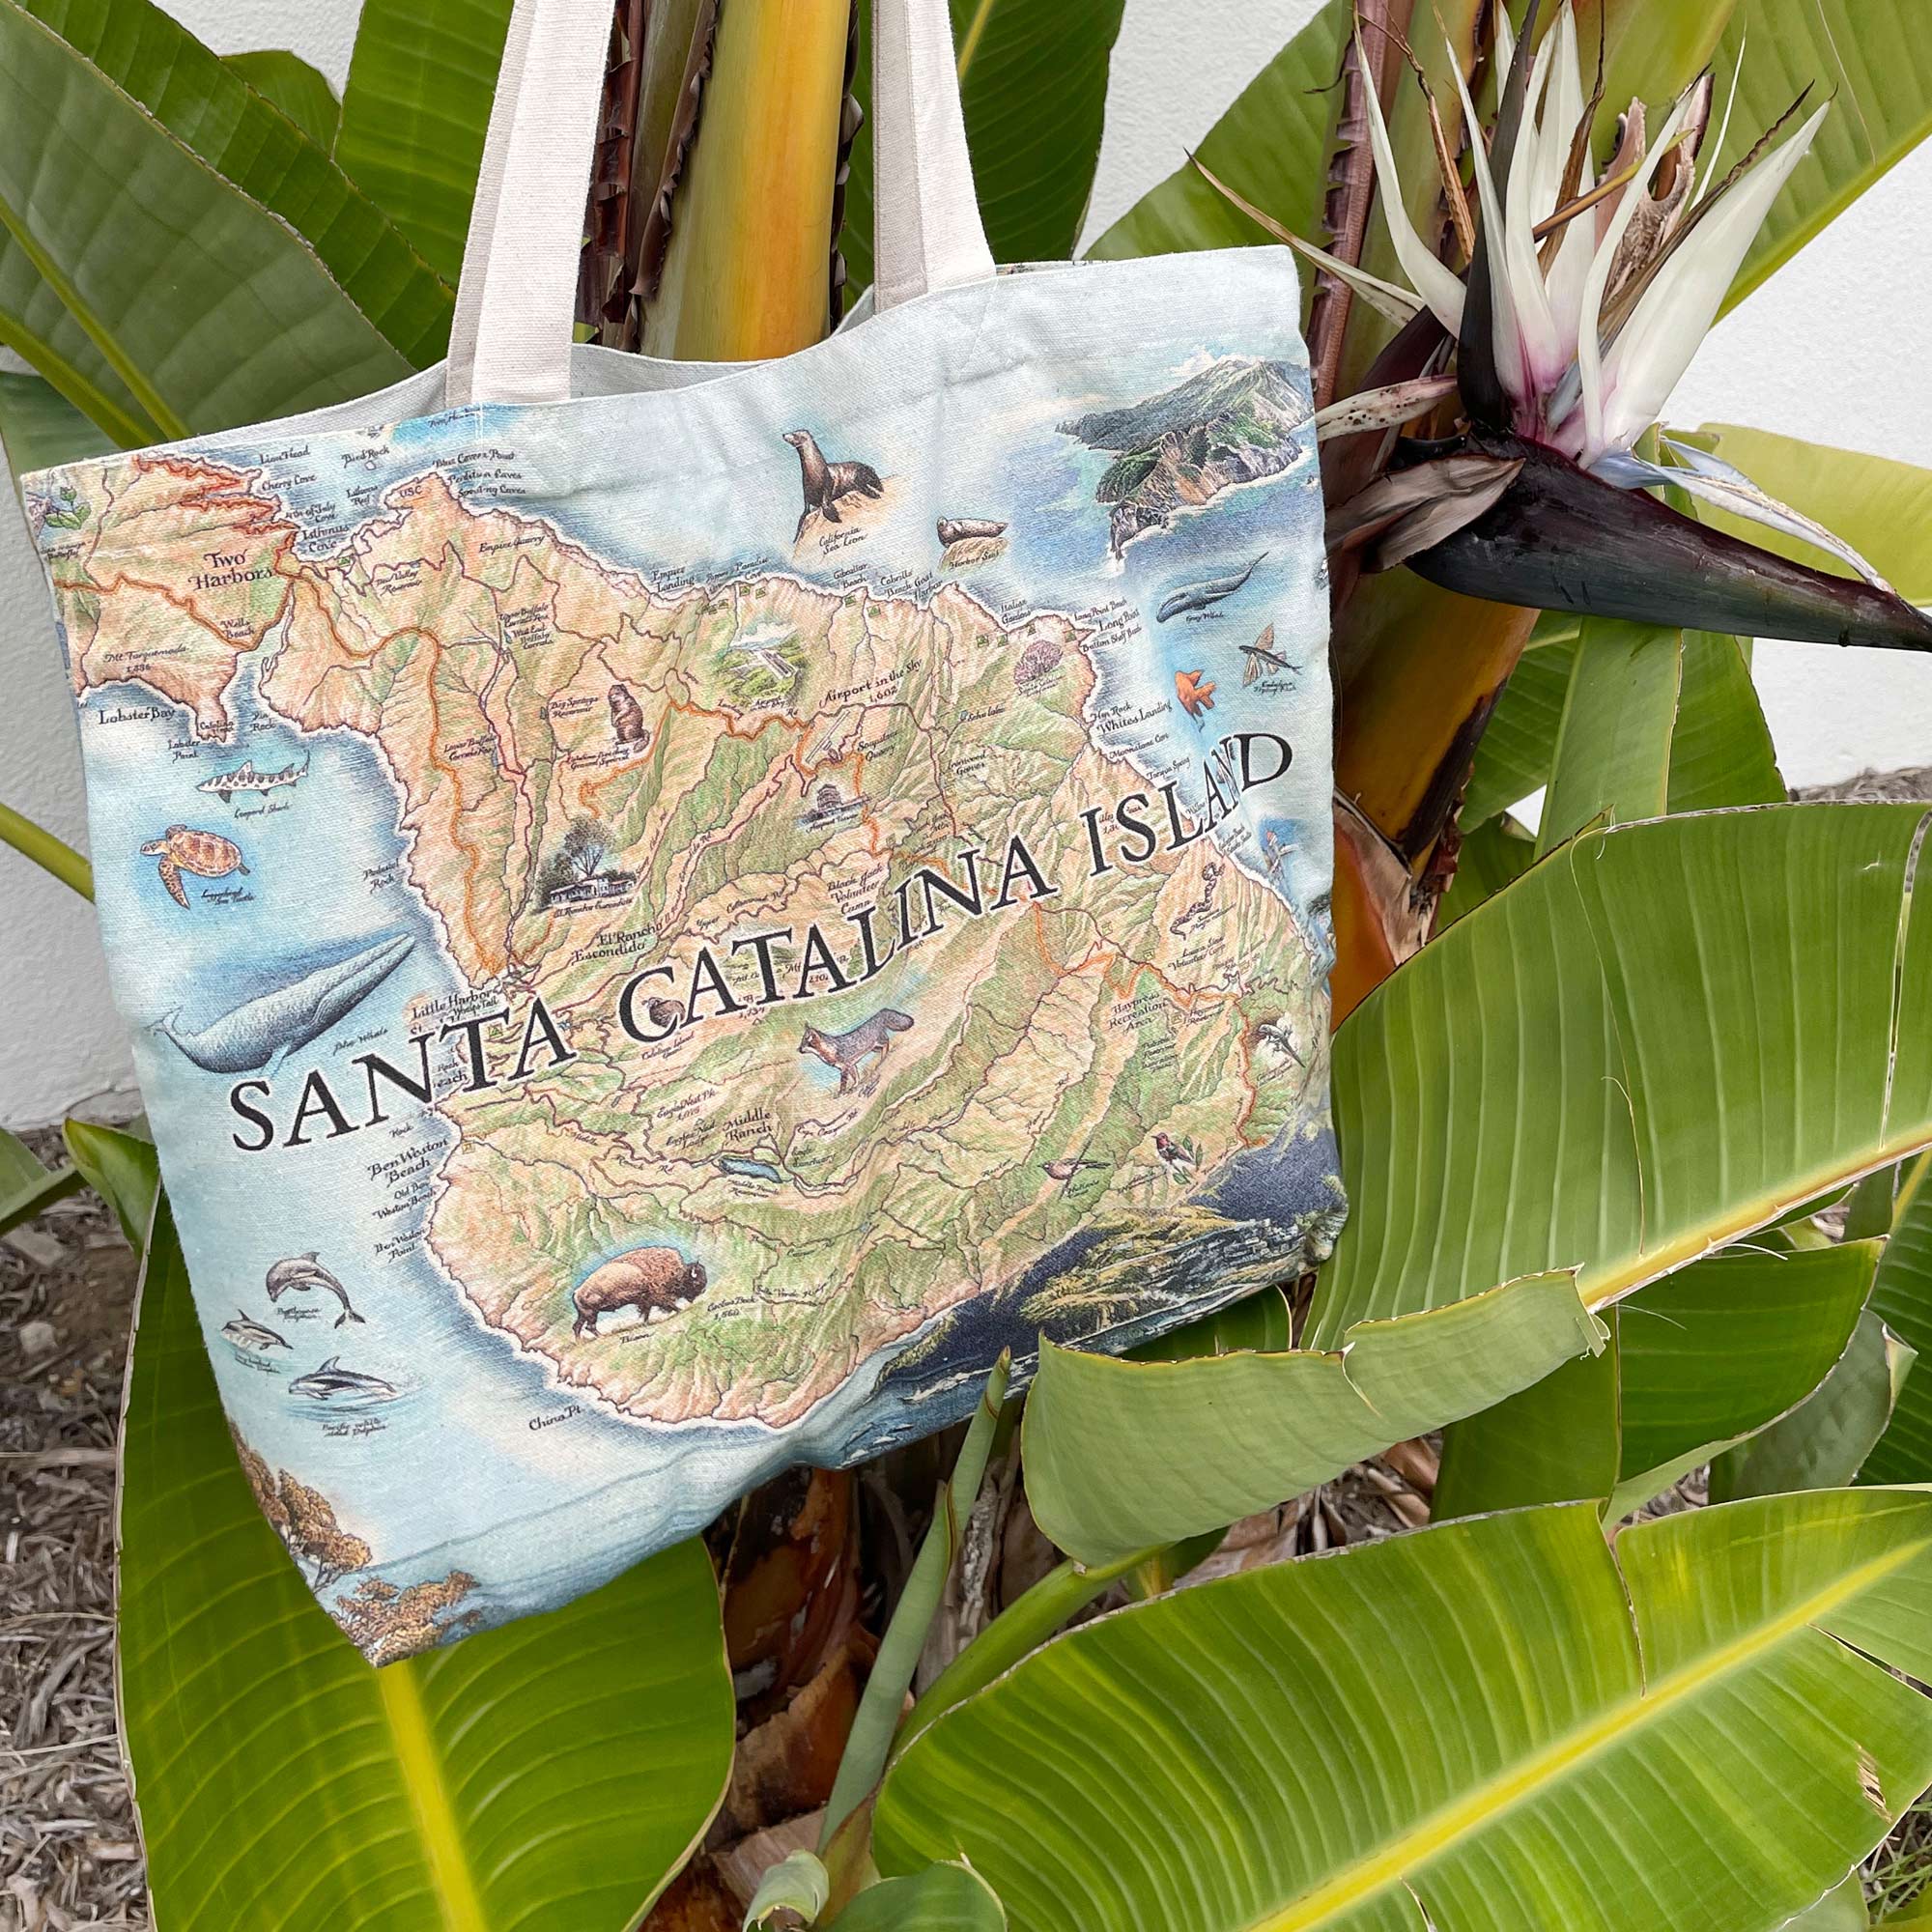 California's Santa Catalina Island canvas tote bag by Xplorer Maps. The Tote bag is hanging on a palm next to a bird of paradise. 